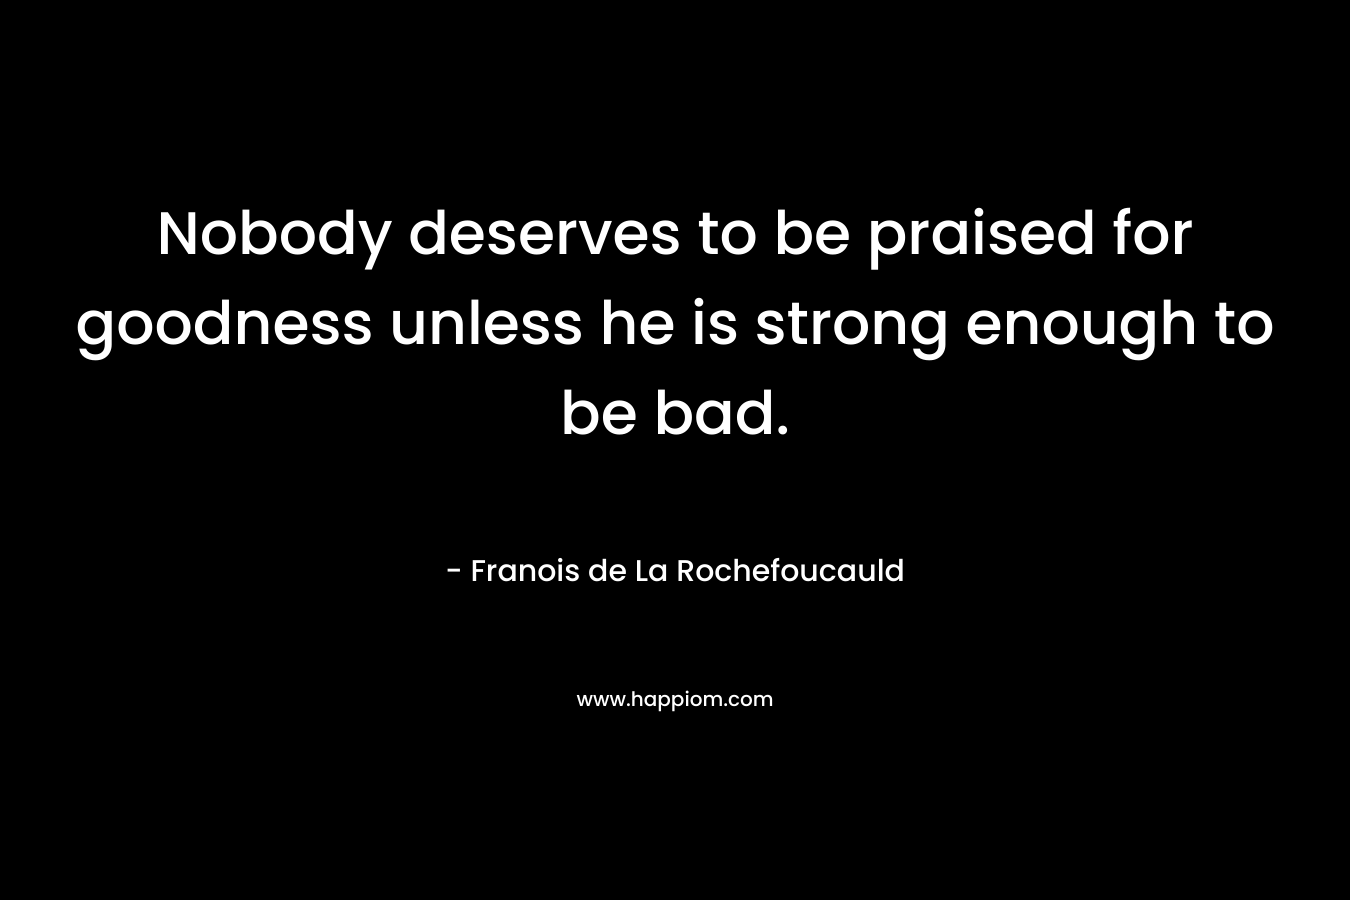 Nobody deserves to be praised for goodness unless he is strong enough to be bad.